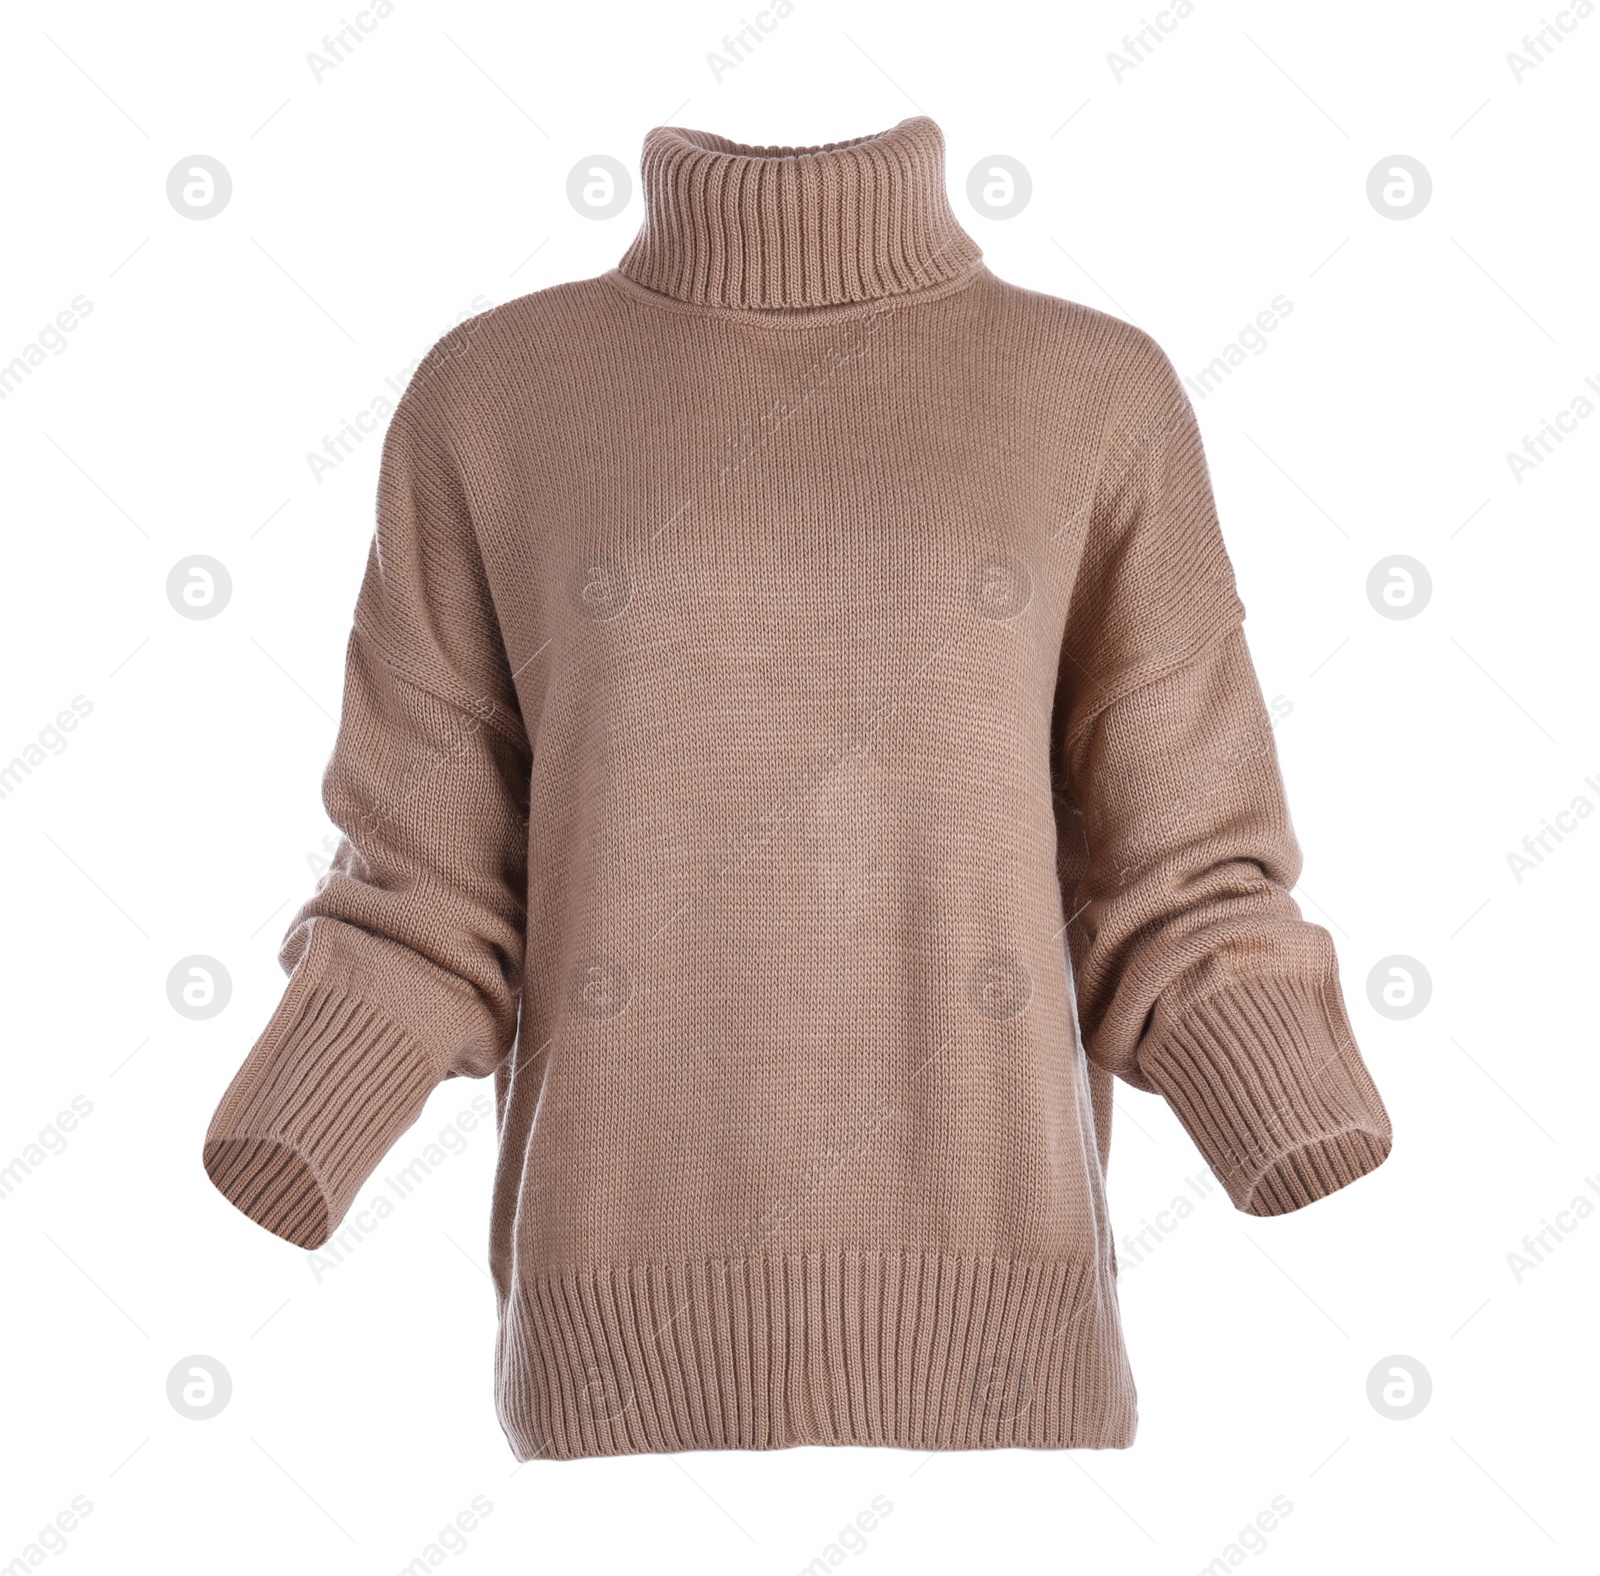 Photo of Stylish warm brown sweater isolated on white